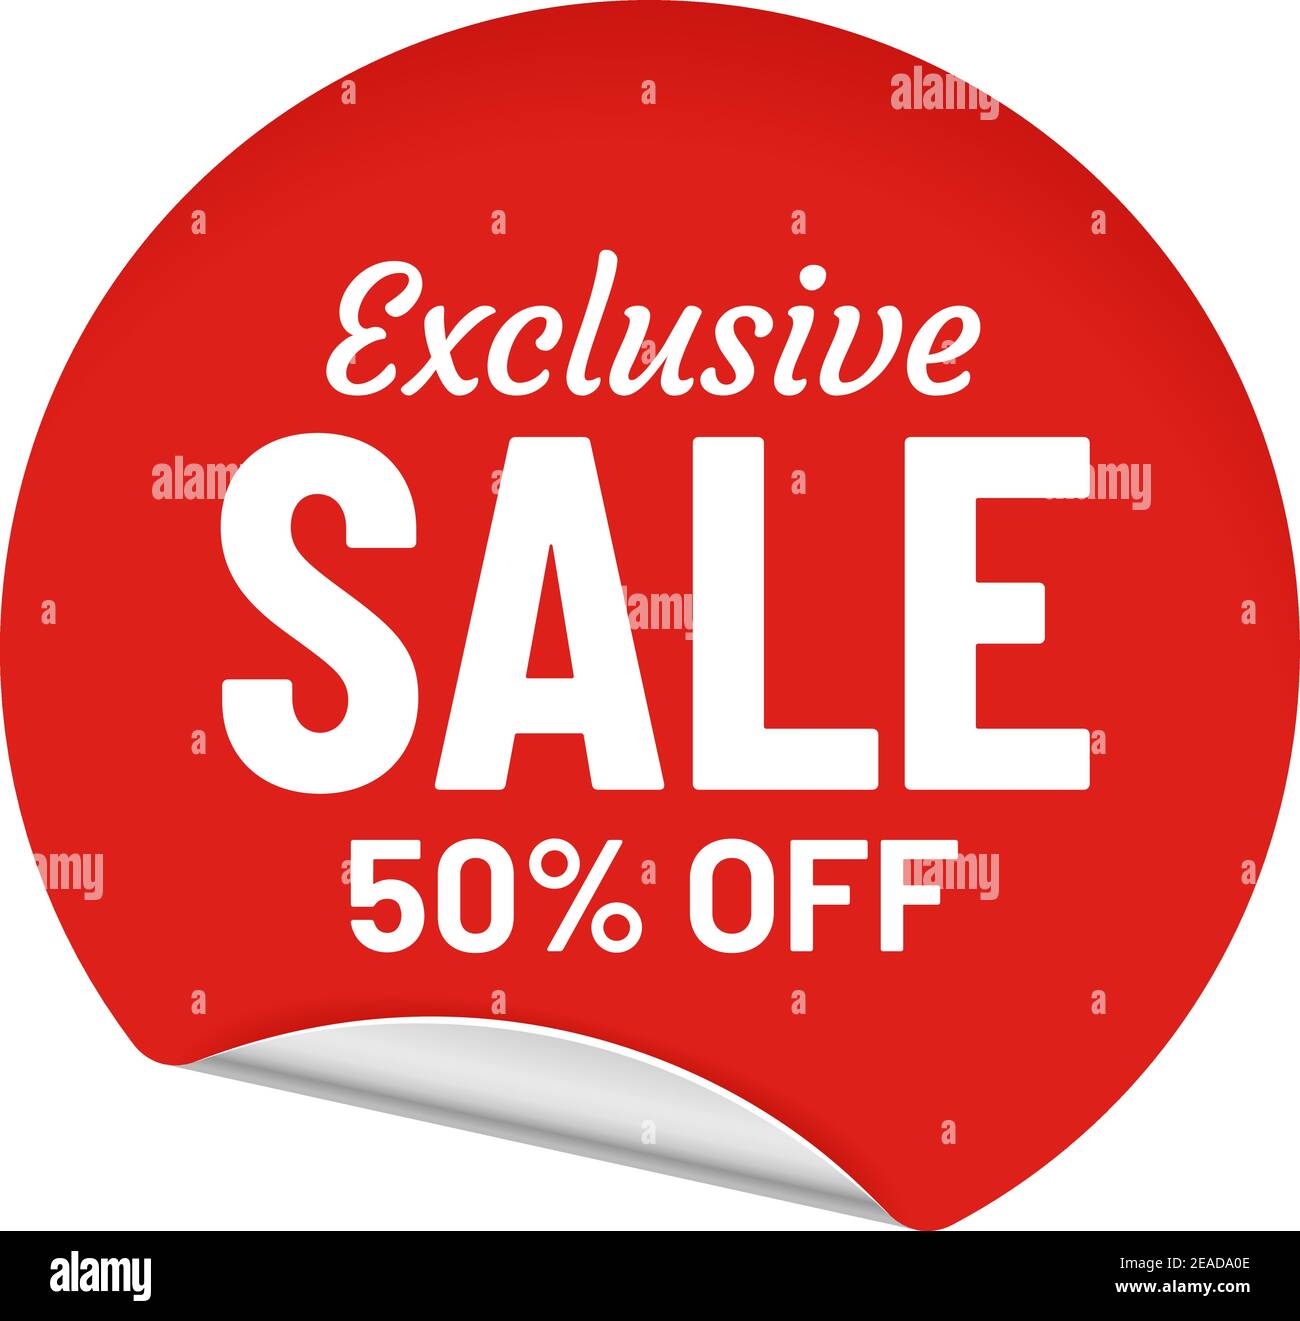 Exclusive sale 50 percent off, round sticker with message. Shopping offer for customer. Best pricing Stock Vector